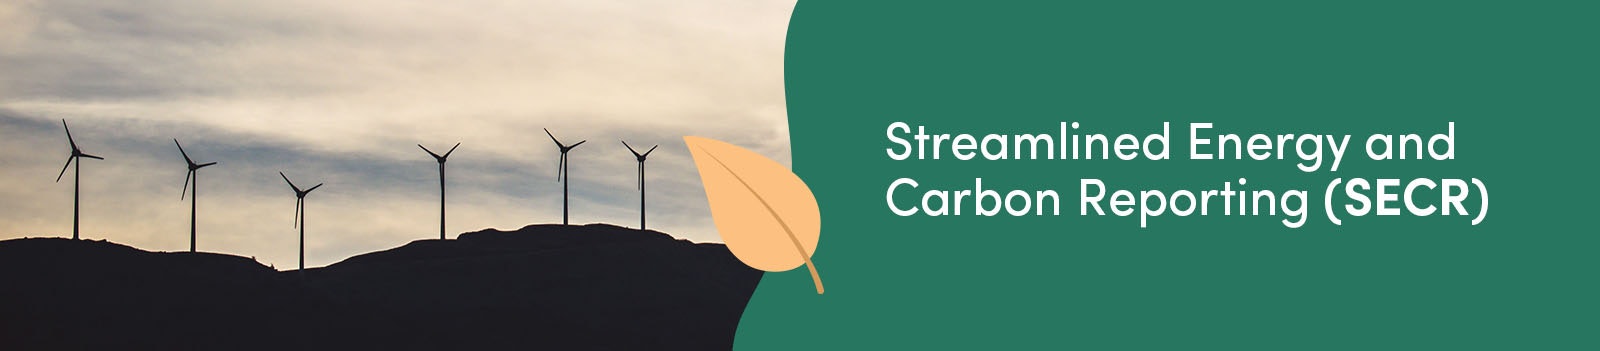 Streamlined Energy and Carbon Reporting (SECR)